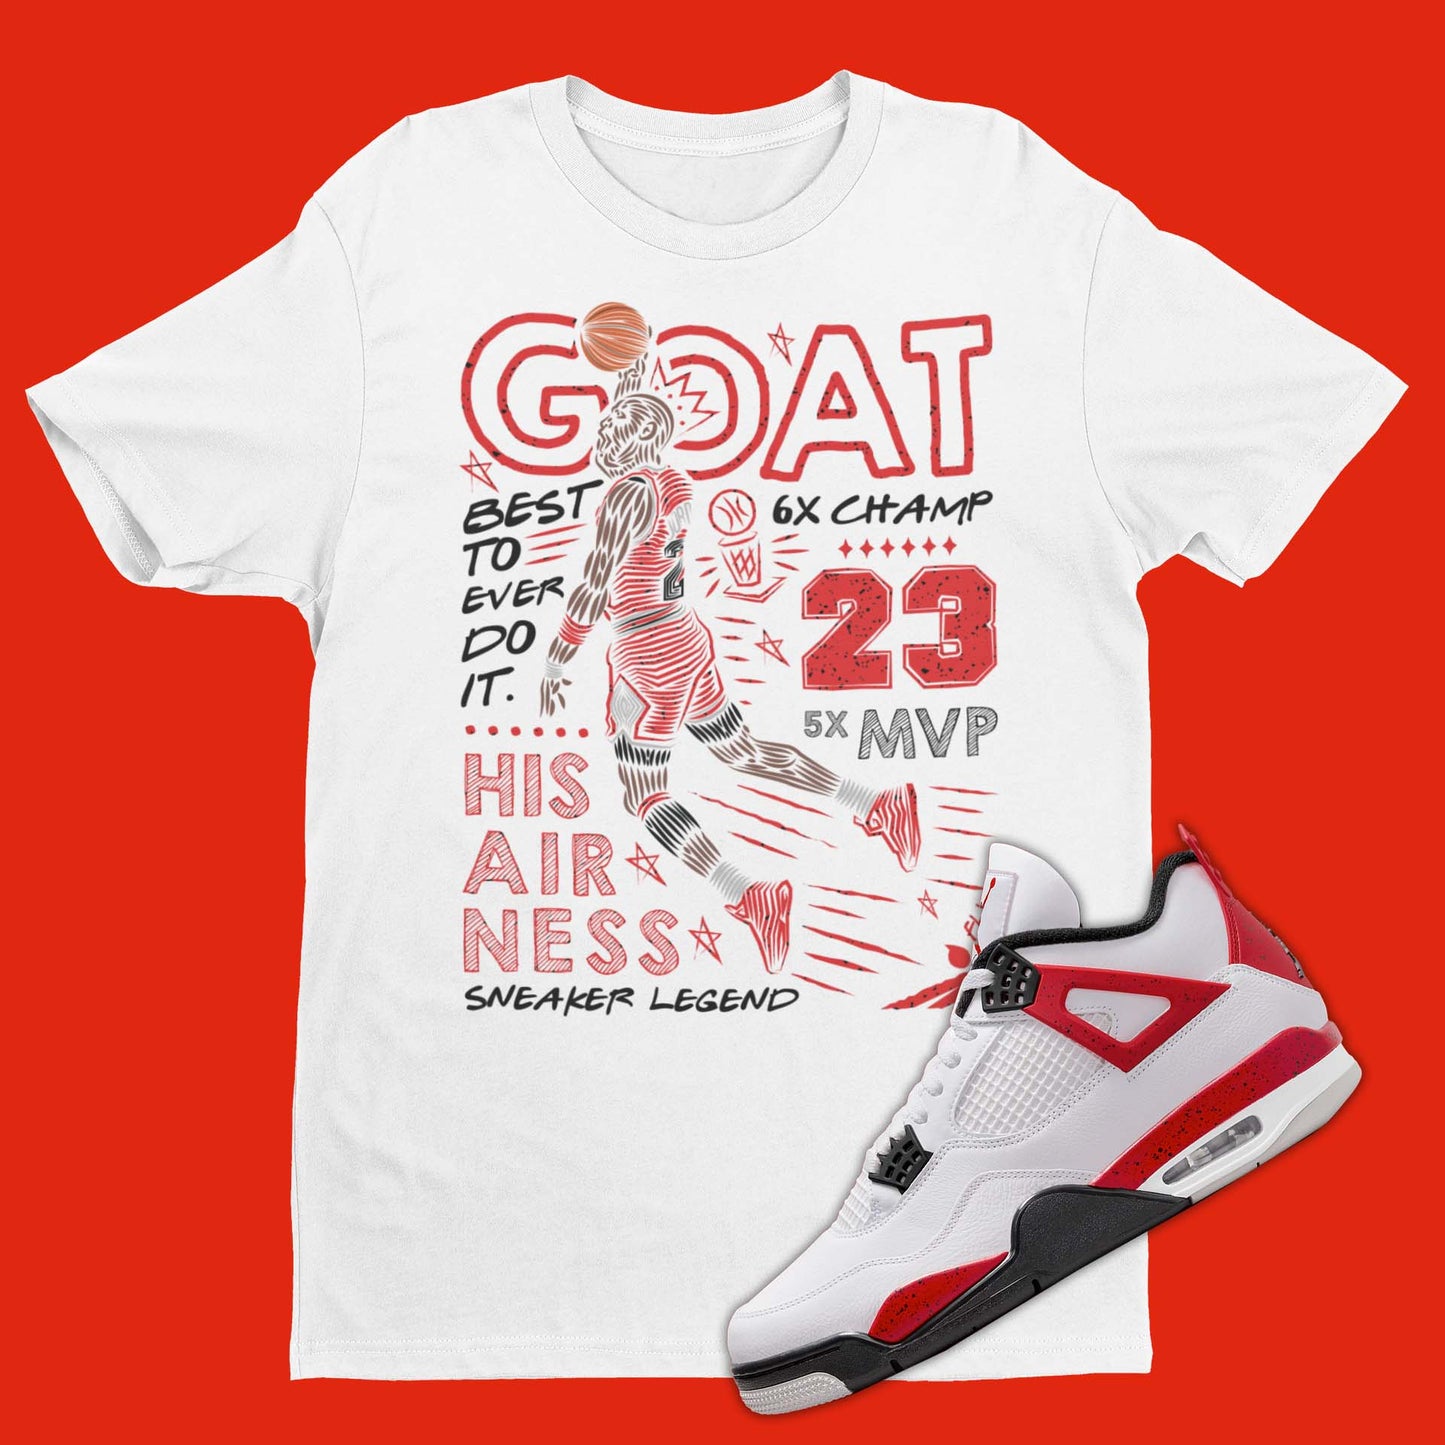 Air Jordan 4 Red Cement inspired t-shirt with Michael Jordan Dunking on the front with GOAT text.